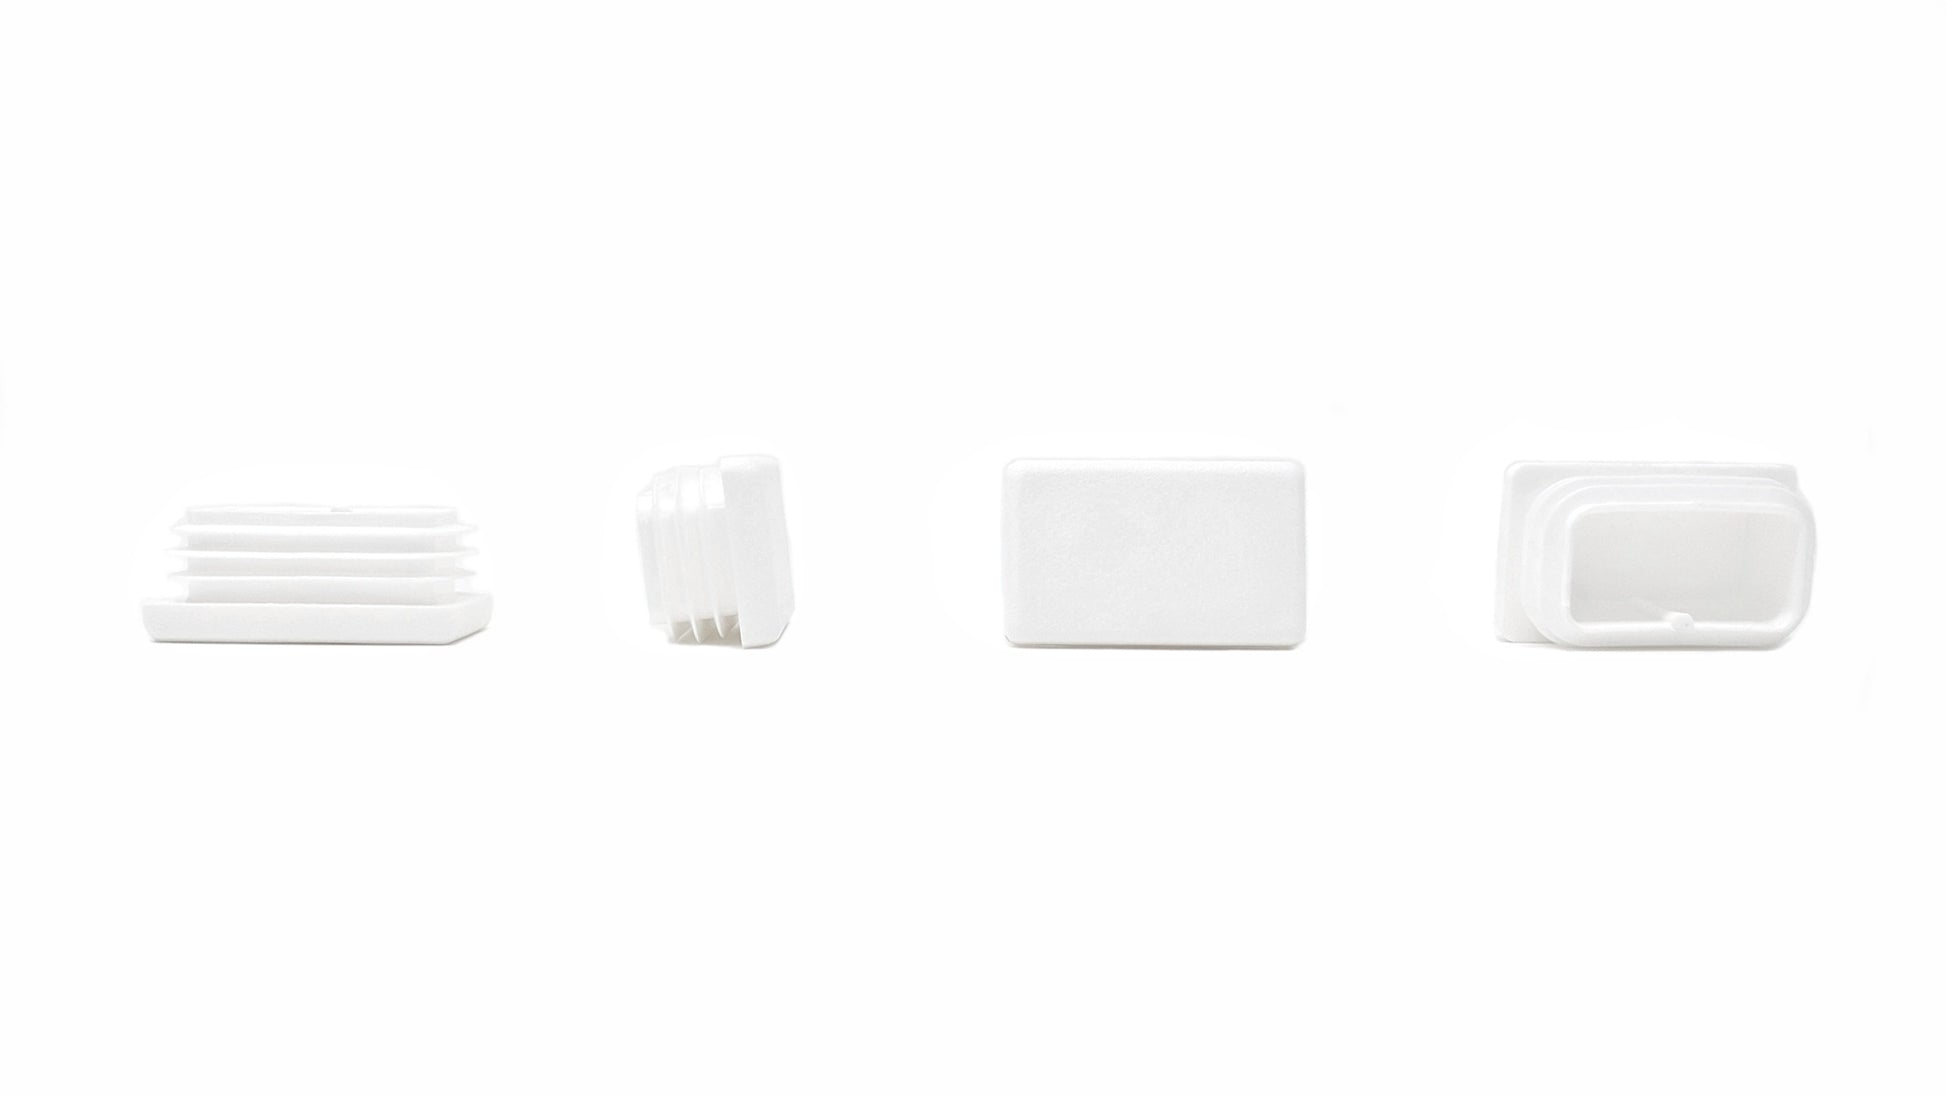 Rectangular Tube Inserts 40mm x 25mm White | Made in Germany | Keay Vital Parts - Keay Vital Parts